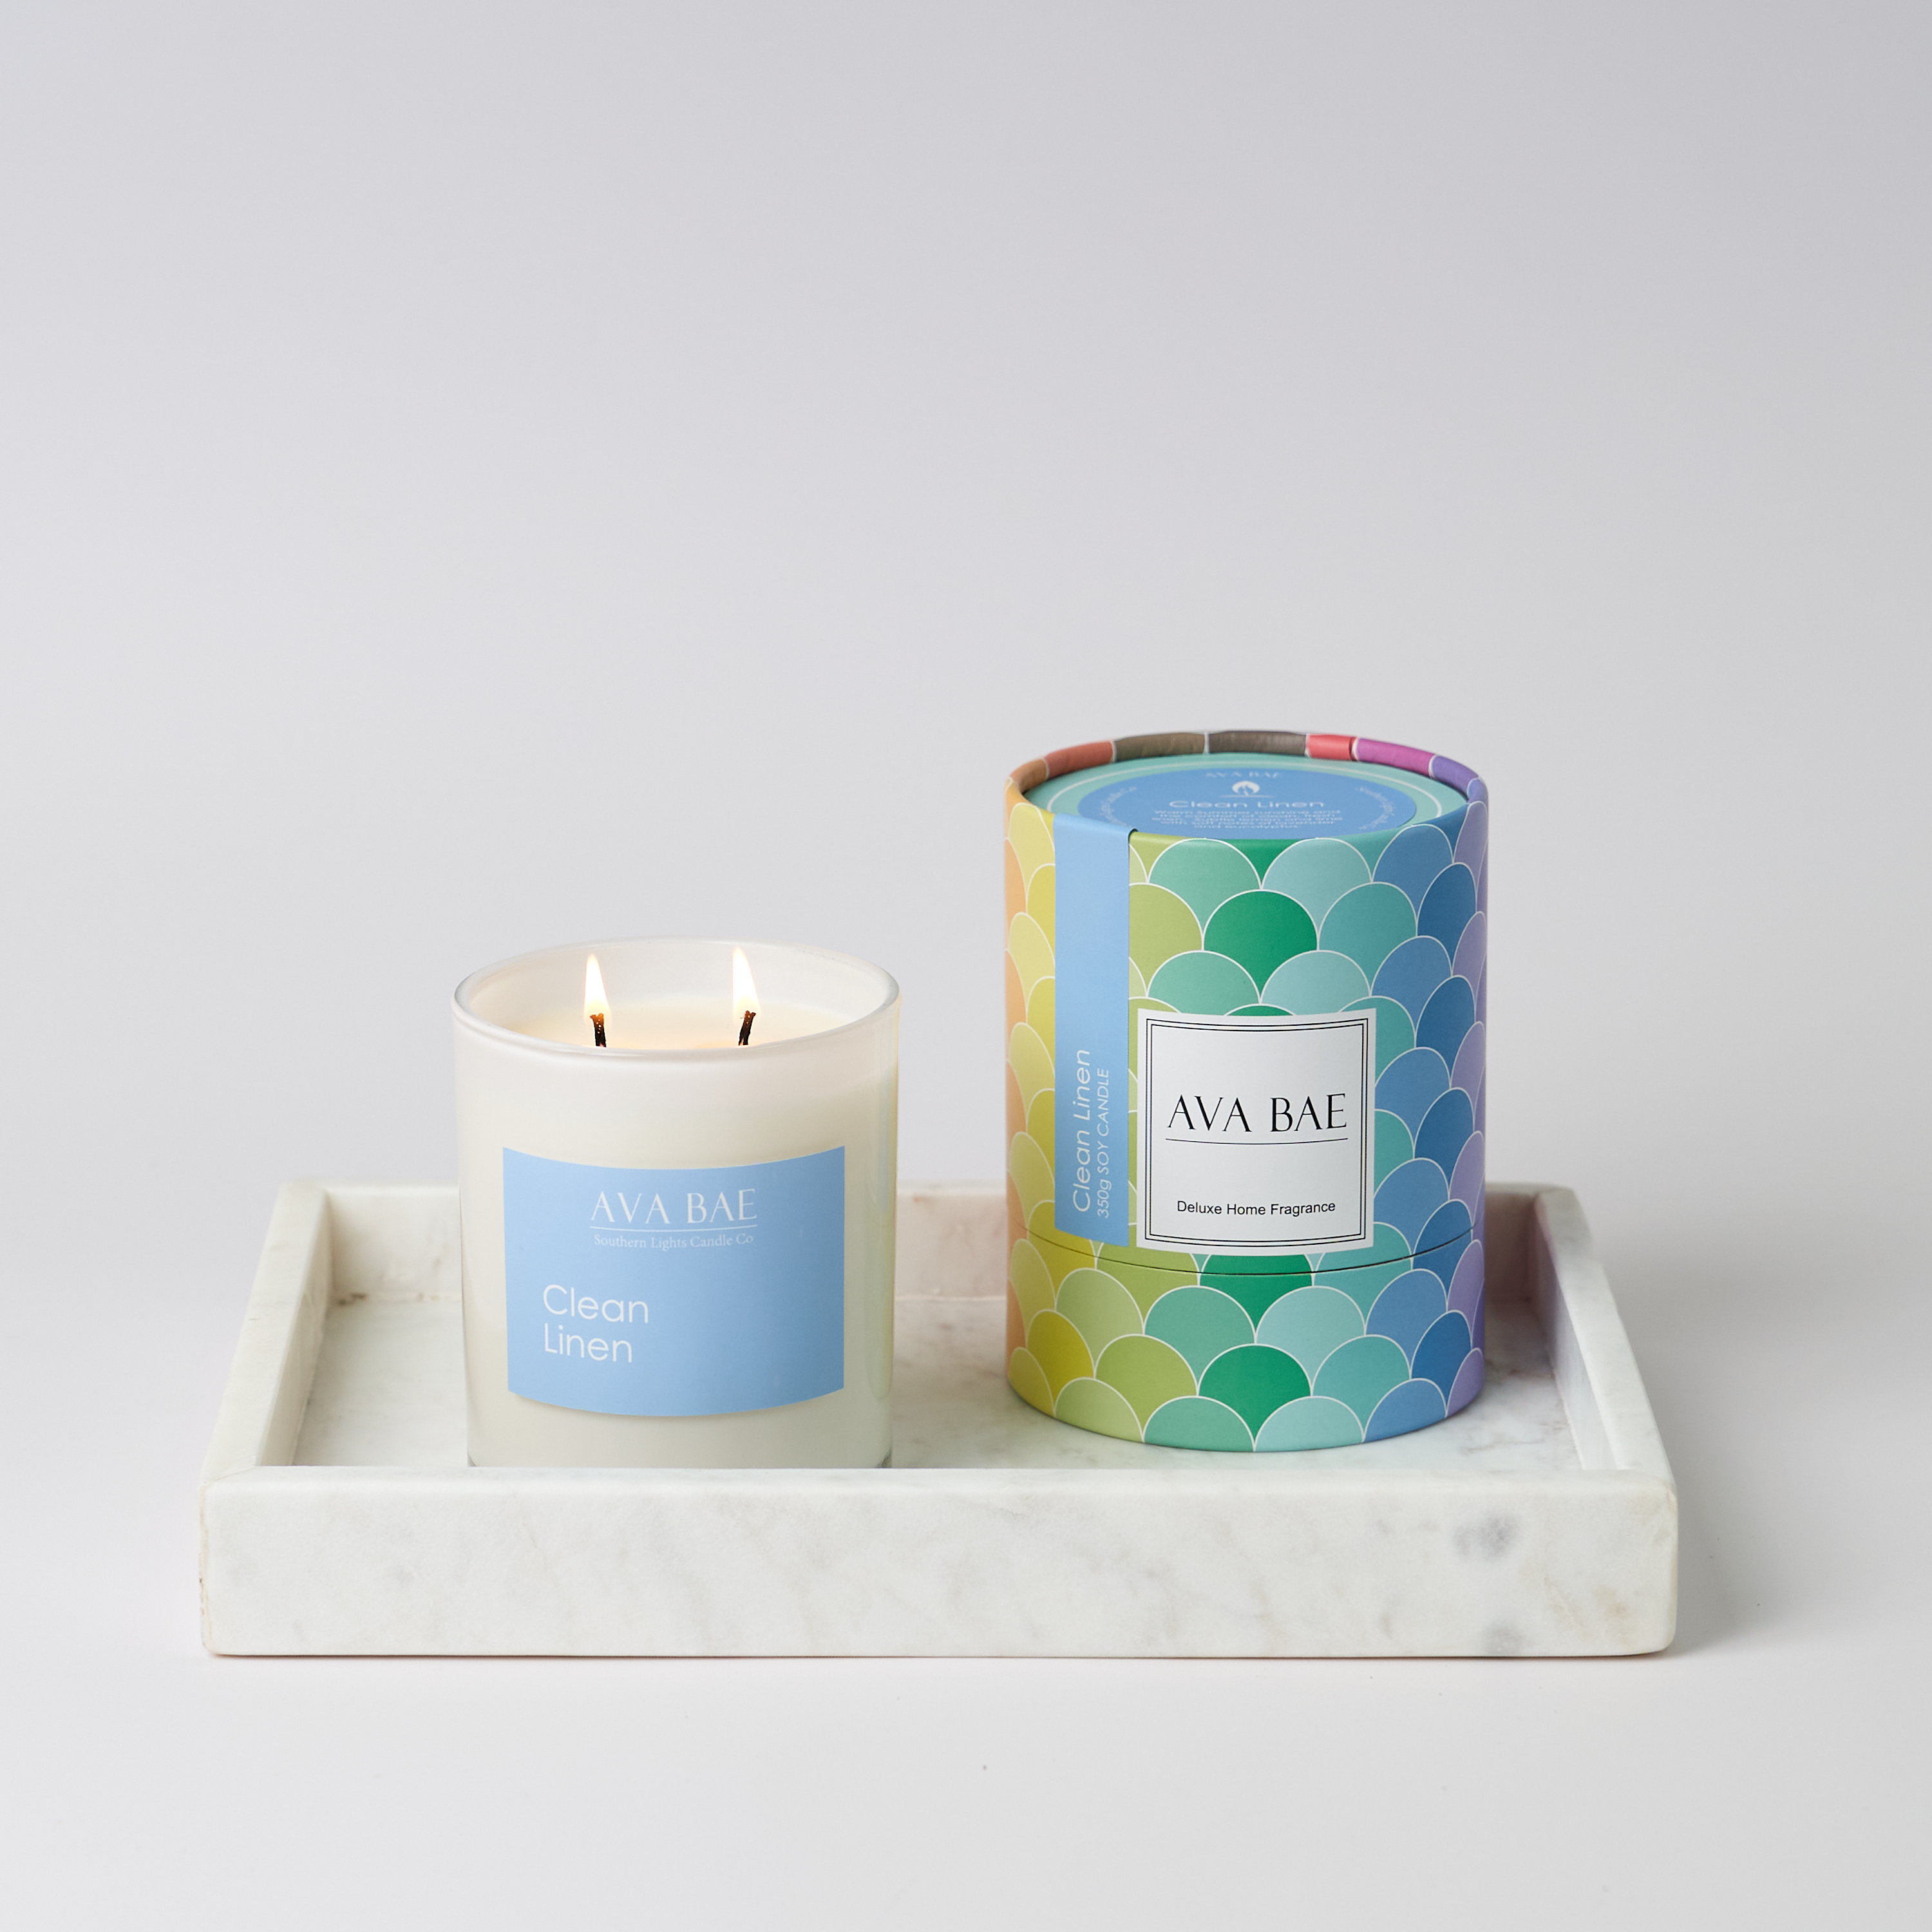 Ava Bae Soy Candle 350g - Clean Linen